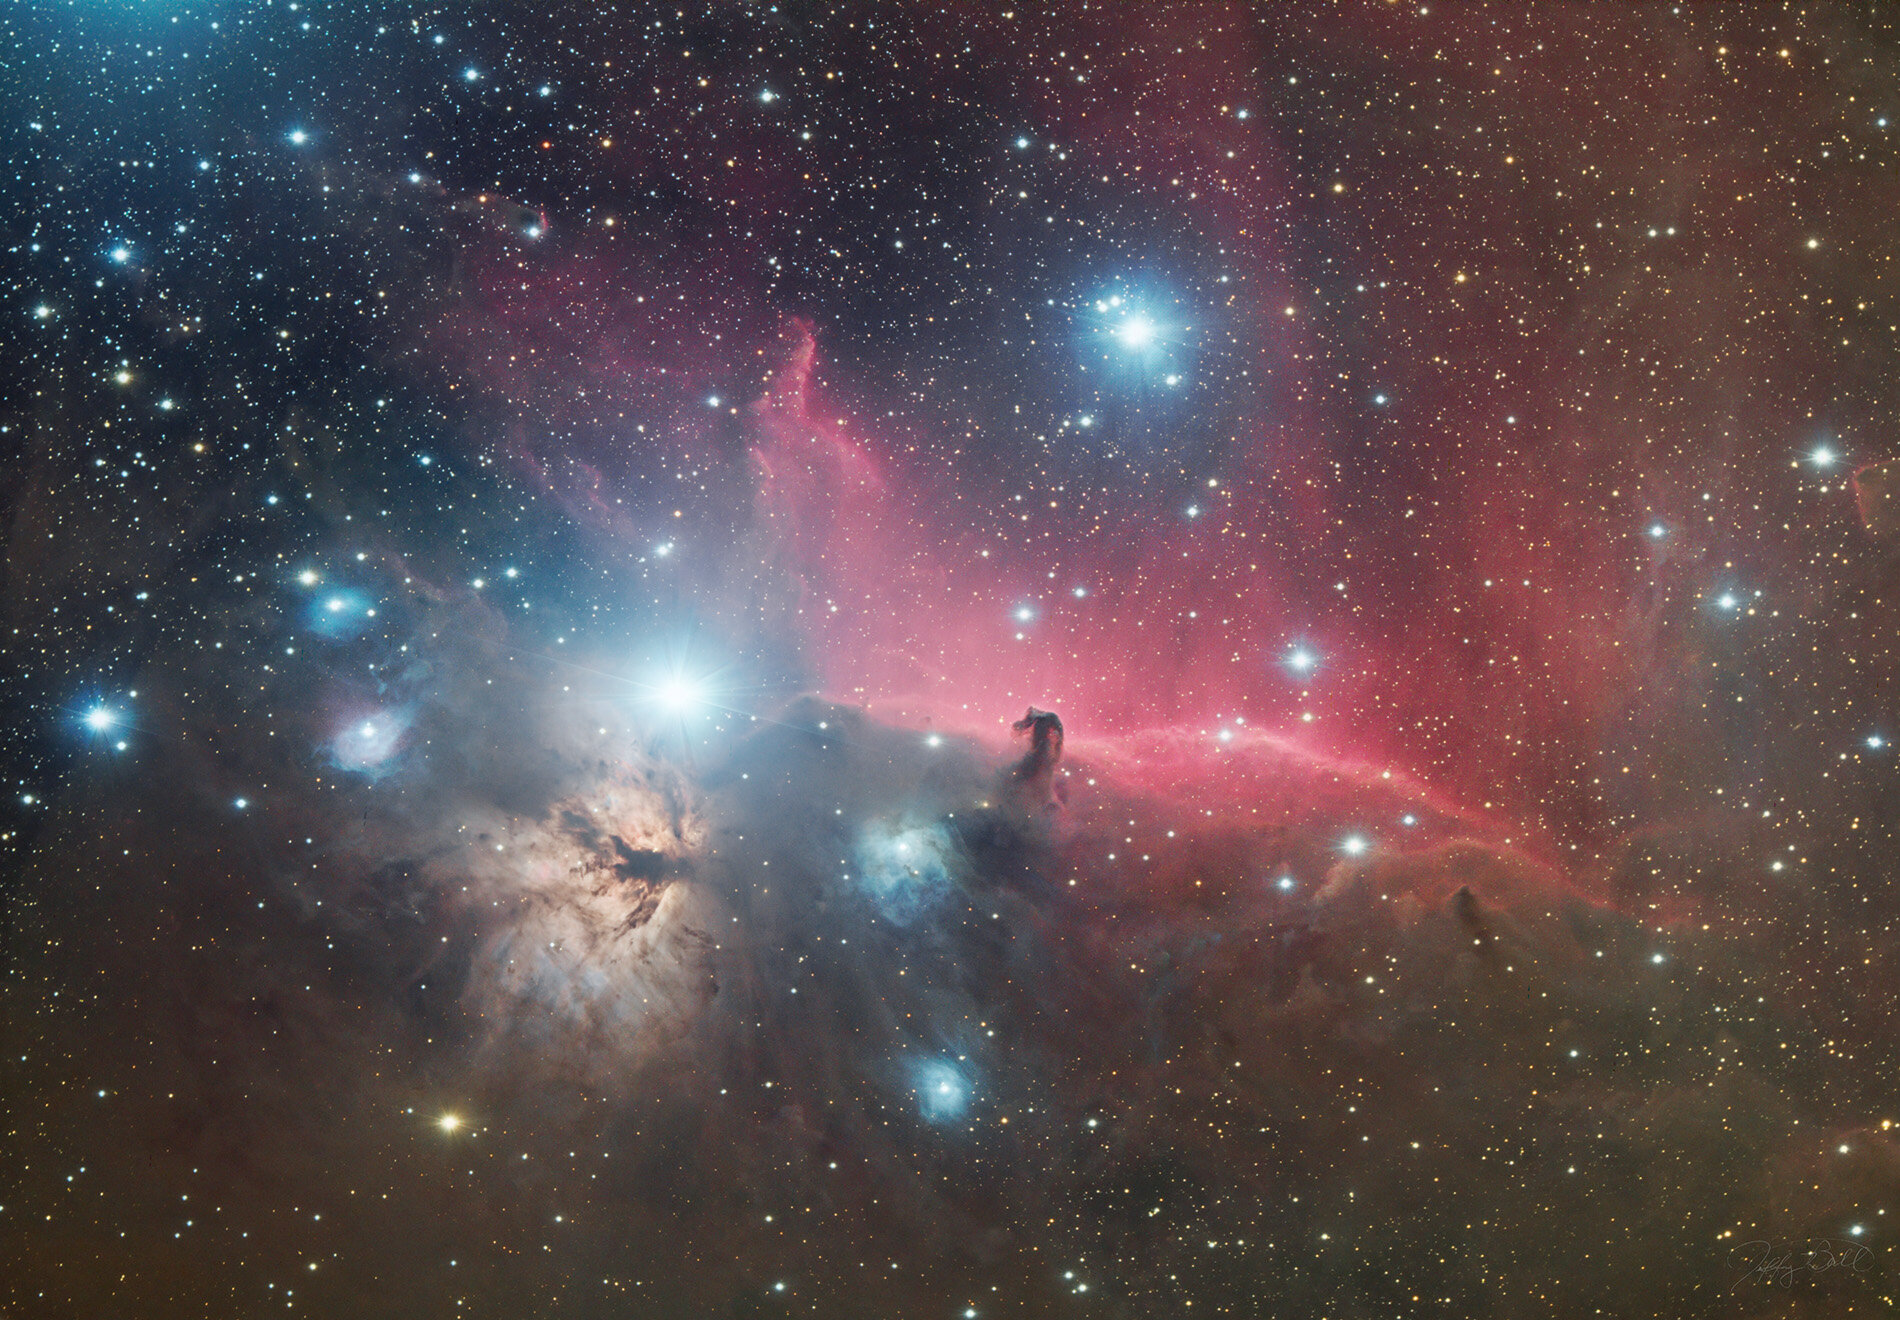  Horsehead and Flame Nebulae in the Orion Constellation. 